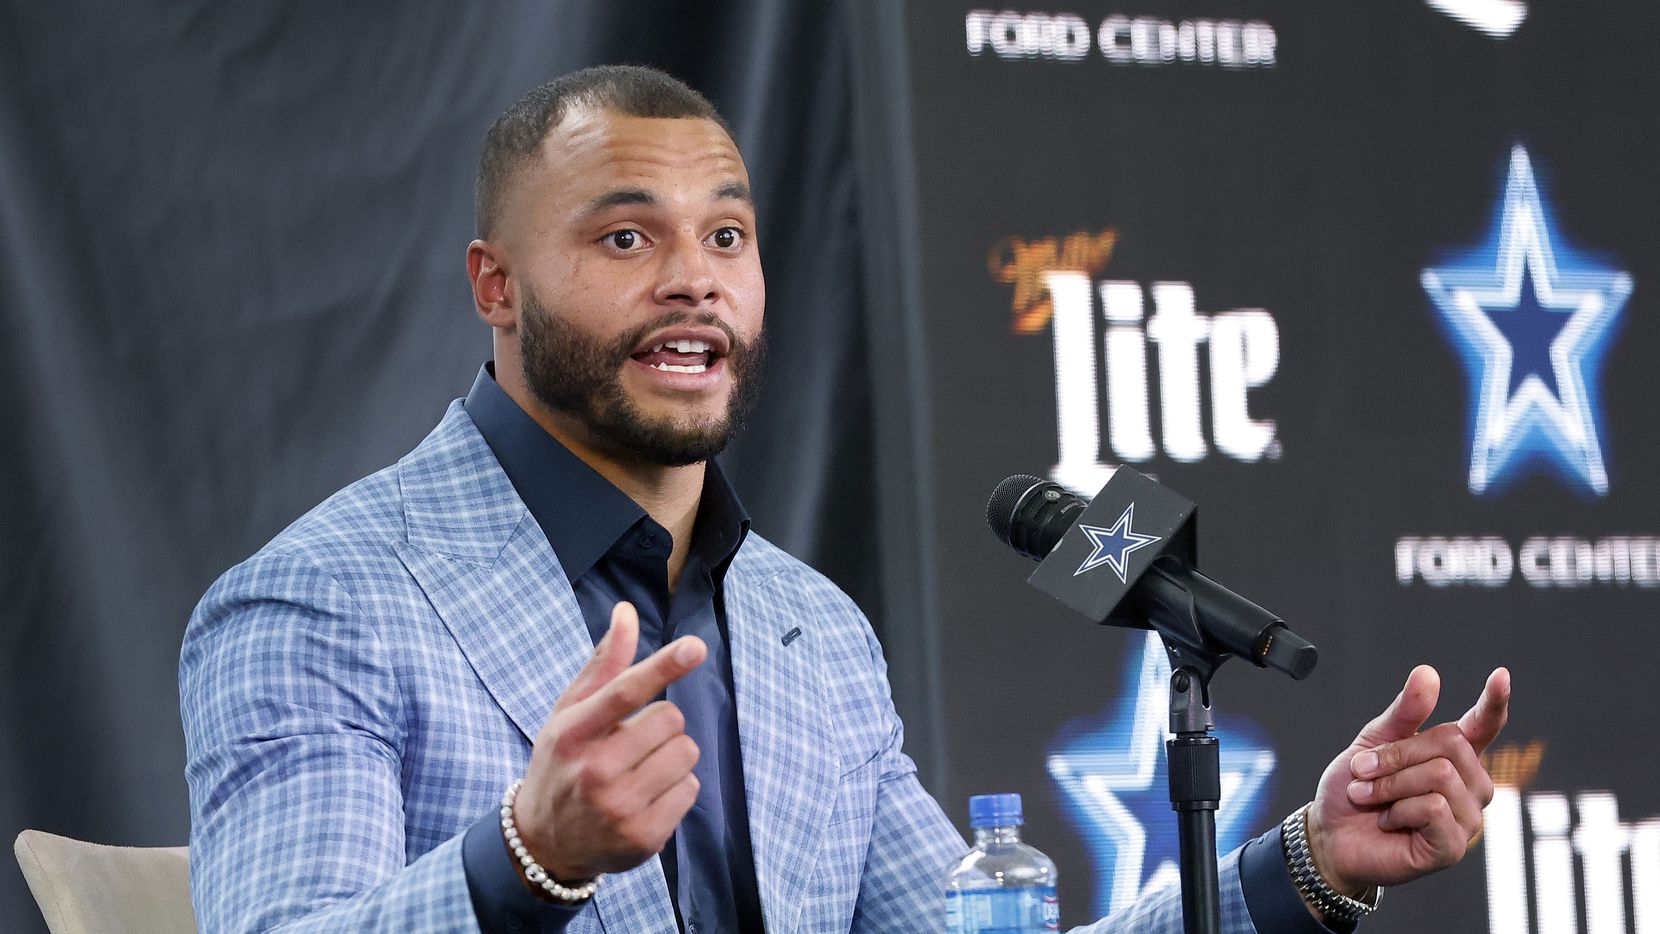 Dallas Cowboys quarterback Dak Prescott responds to media questions at The Star in Frisco, Texas after signing a 4-year, $160 million contract with the team, Wednesday, March 10, 2021.